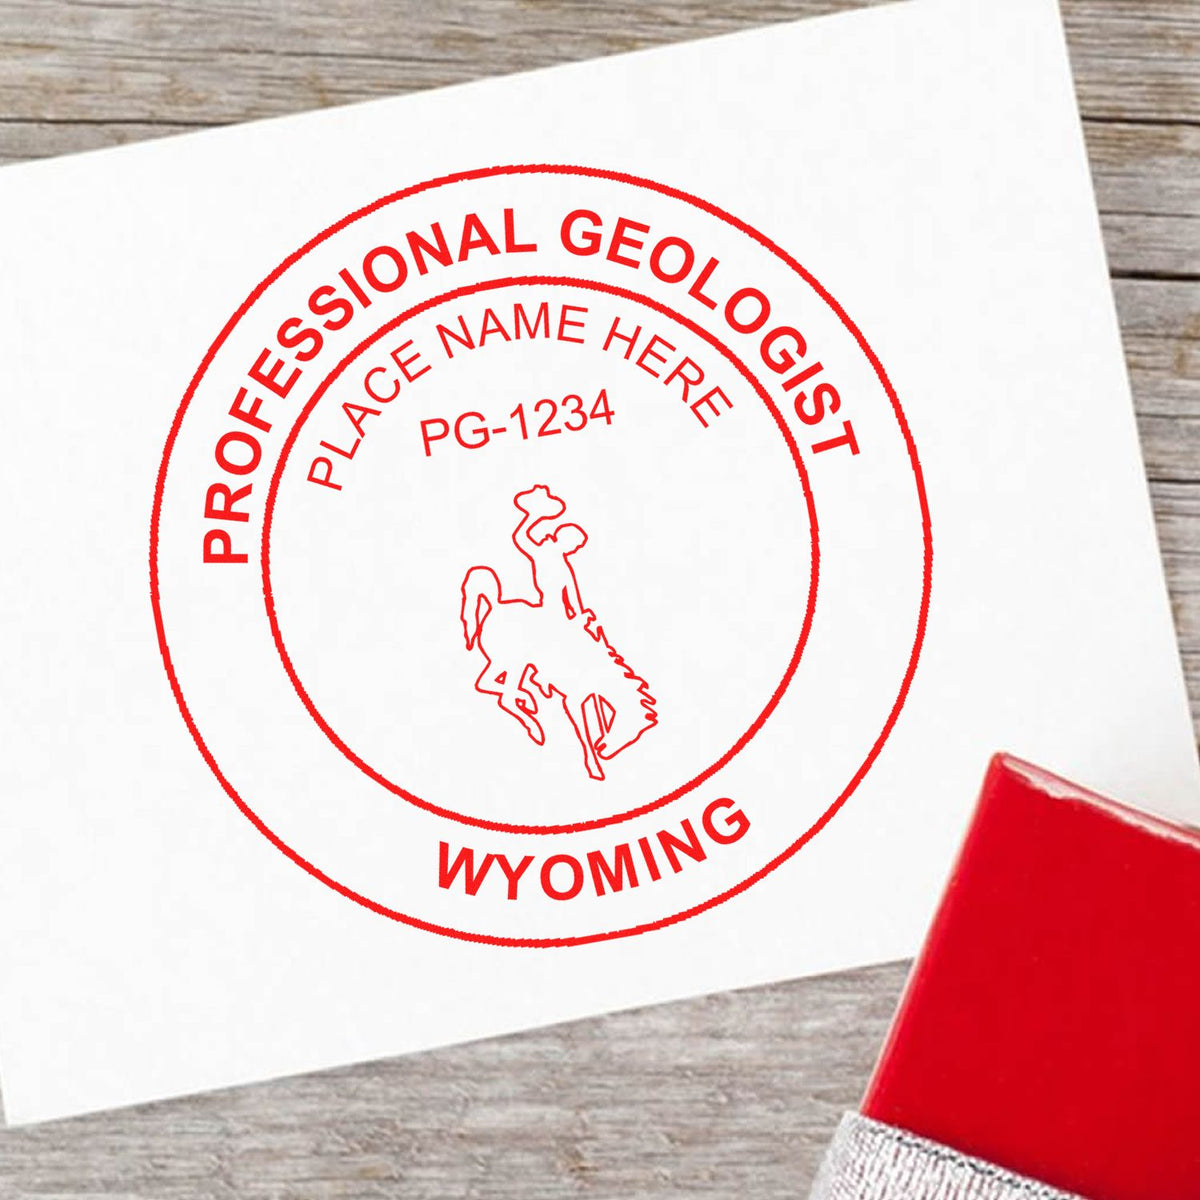 A photograph of the Self-Inking Wyoming Geologist Stamp stamp impression reveals a vivid, professional image of the on paper.